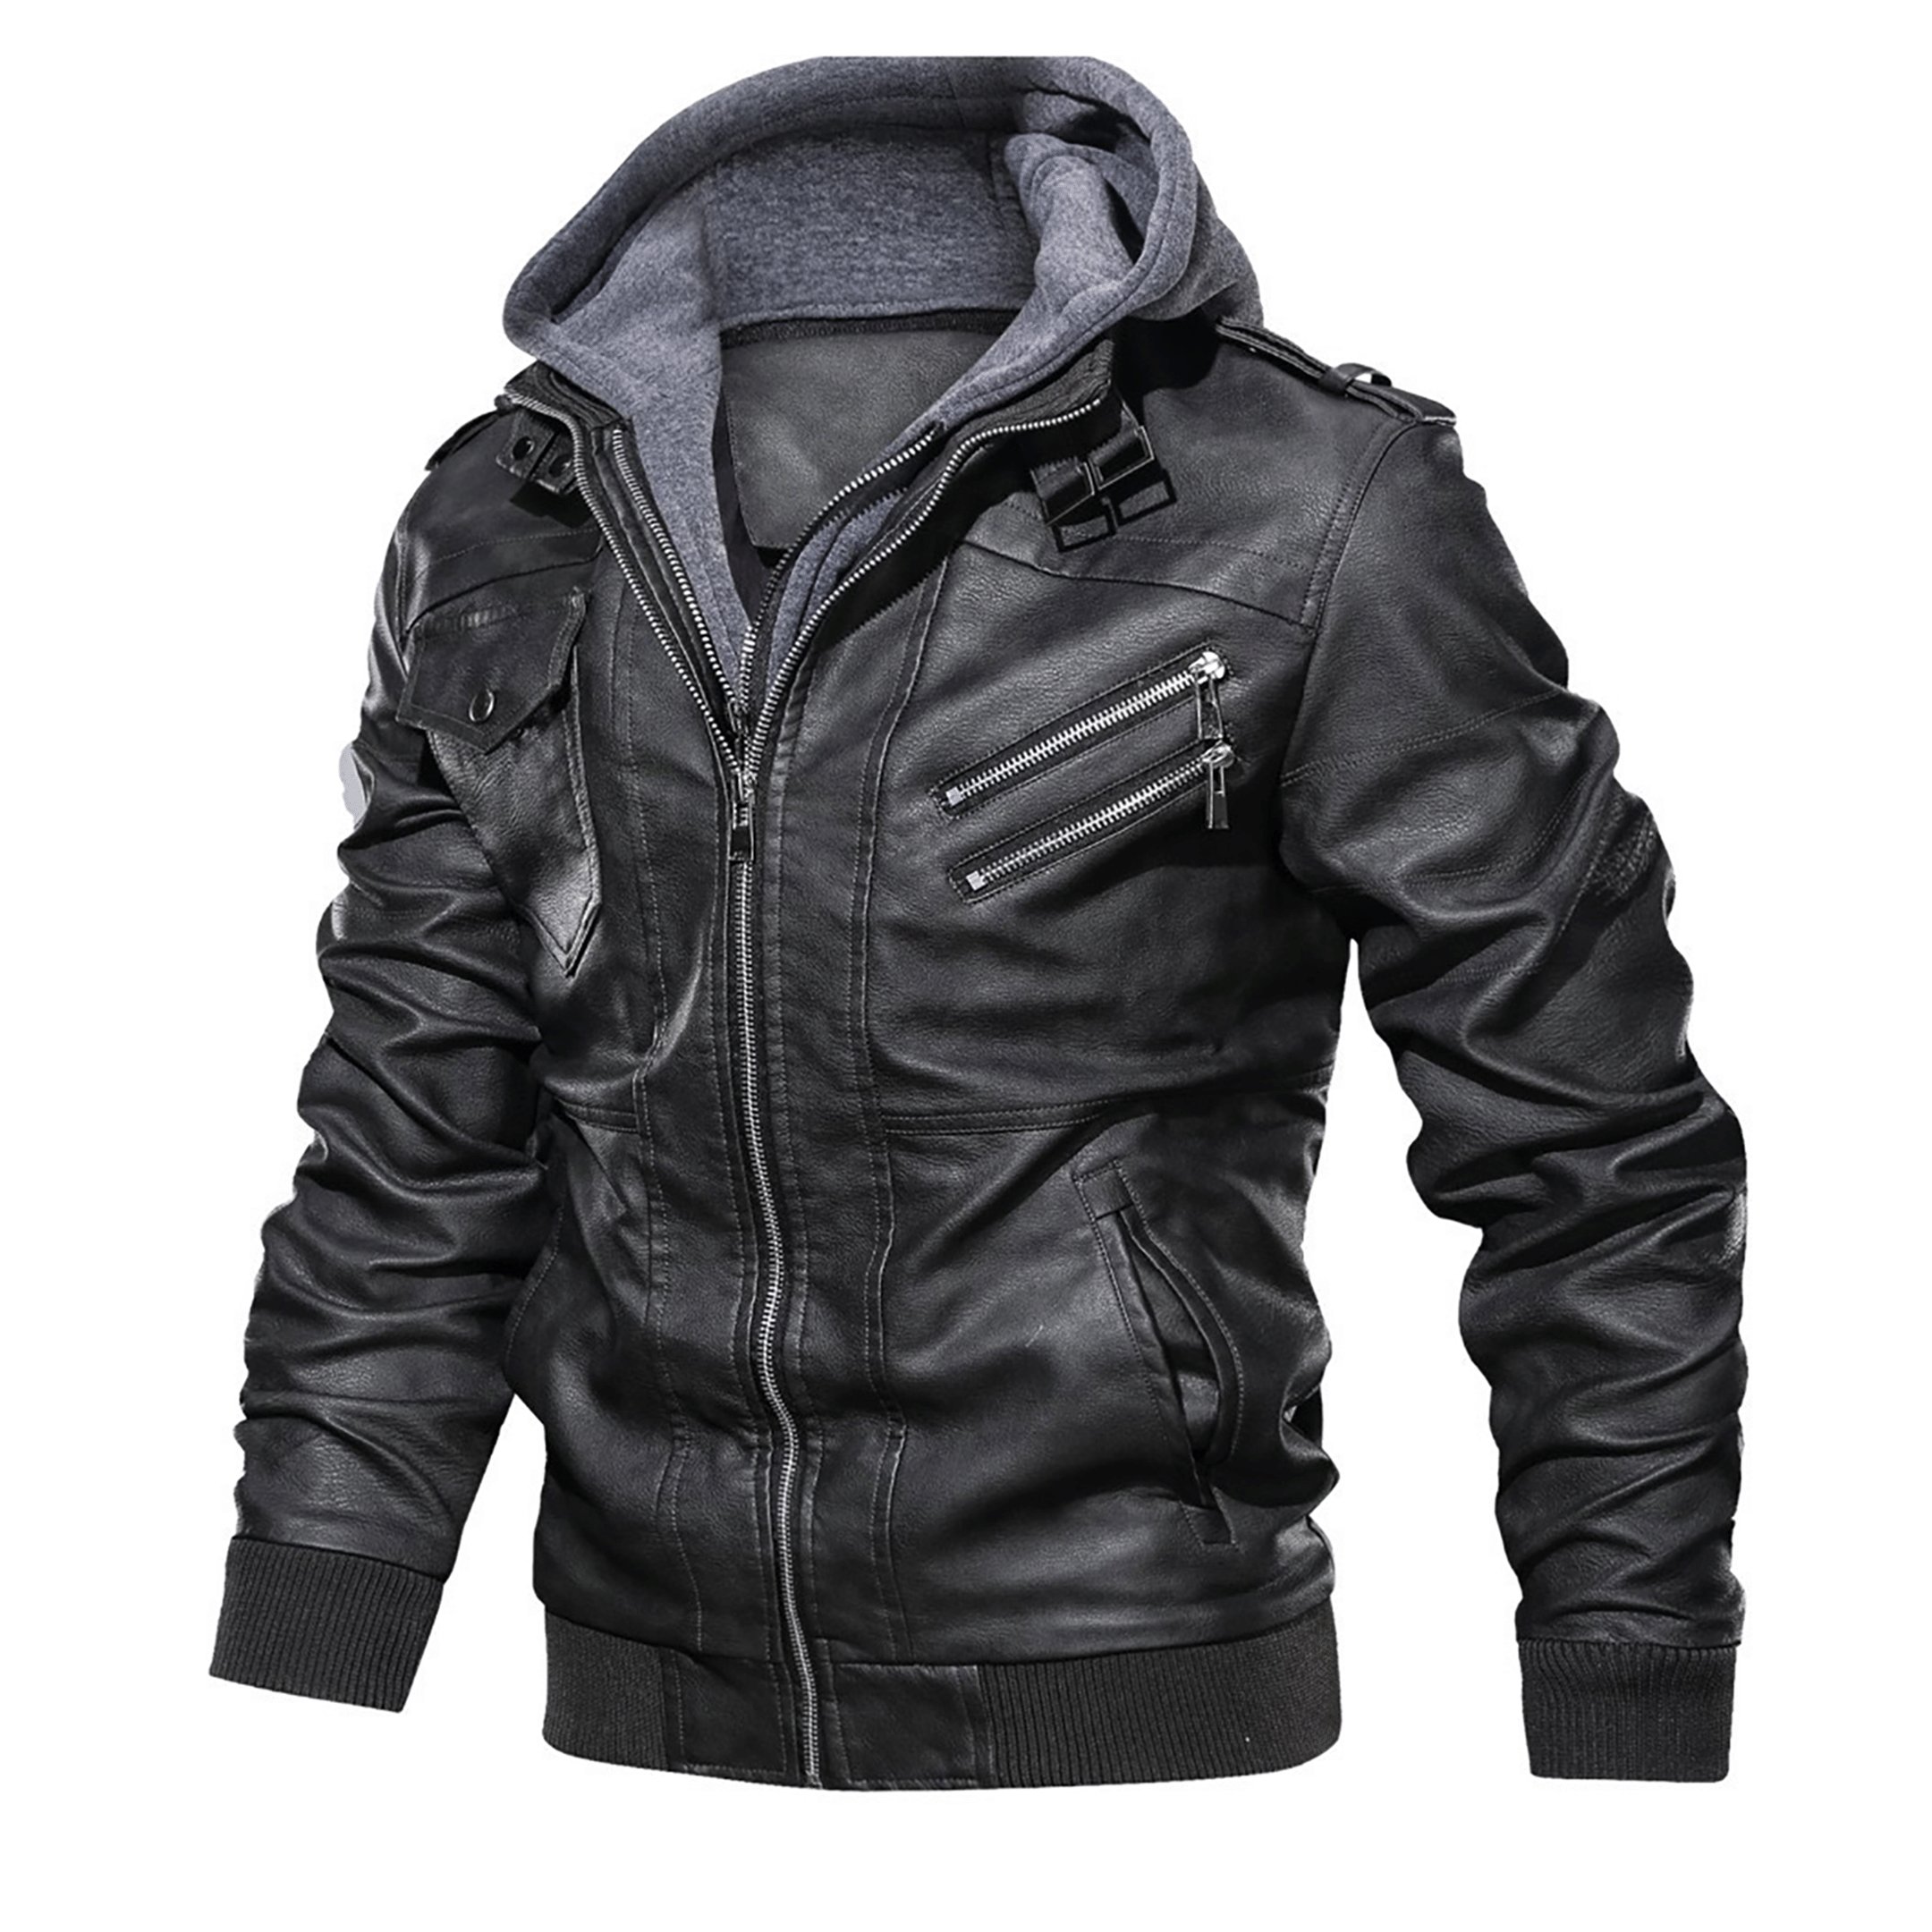 Top leather jackets and latest products 299